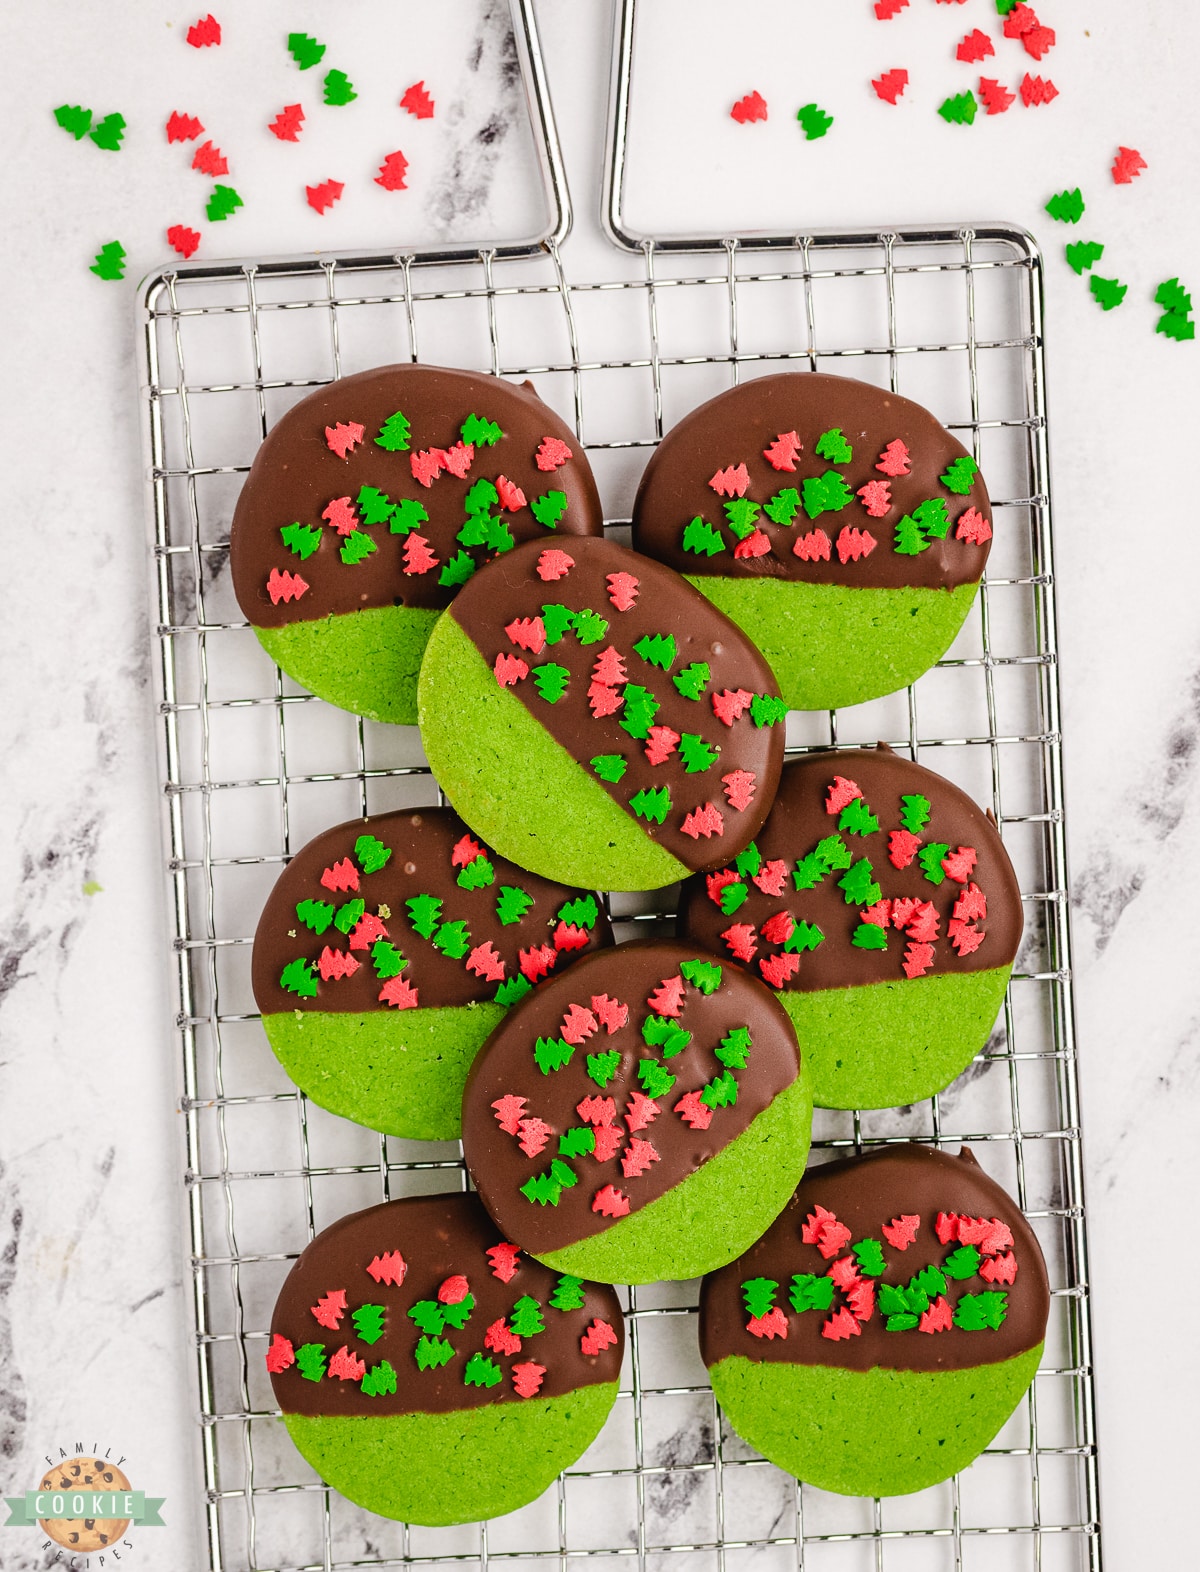 Chocolate Christmas cookies on a cooling rack